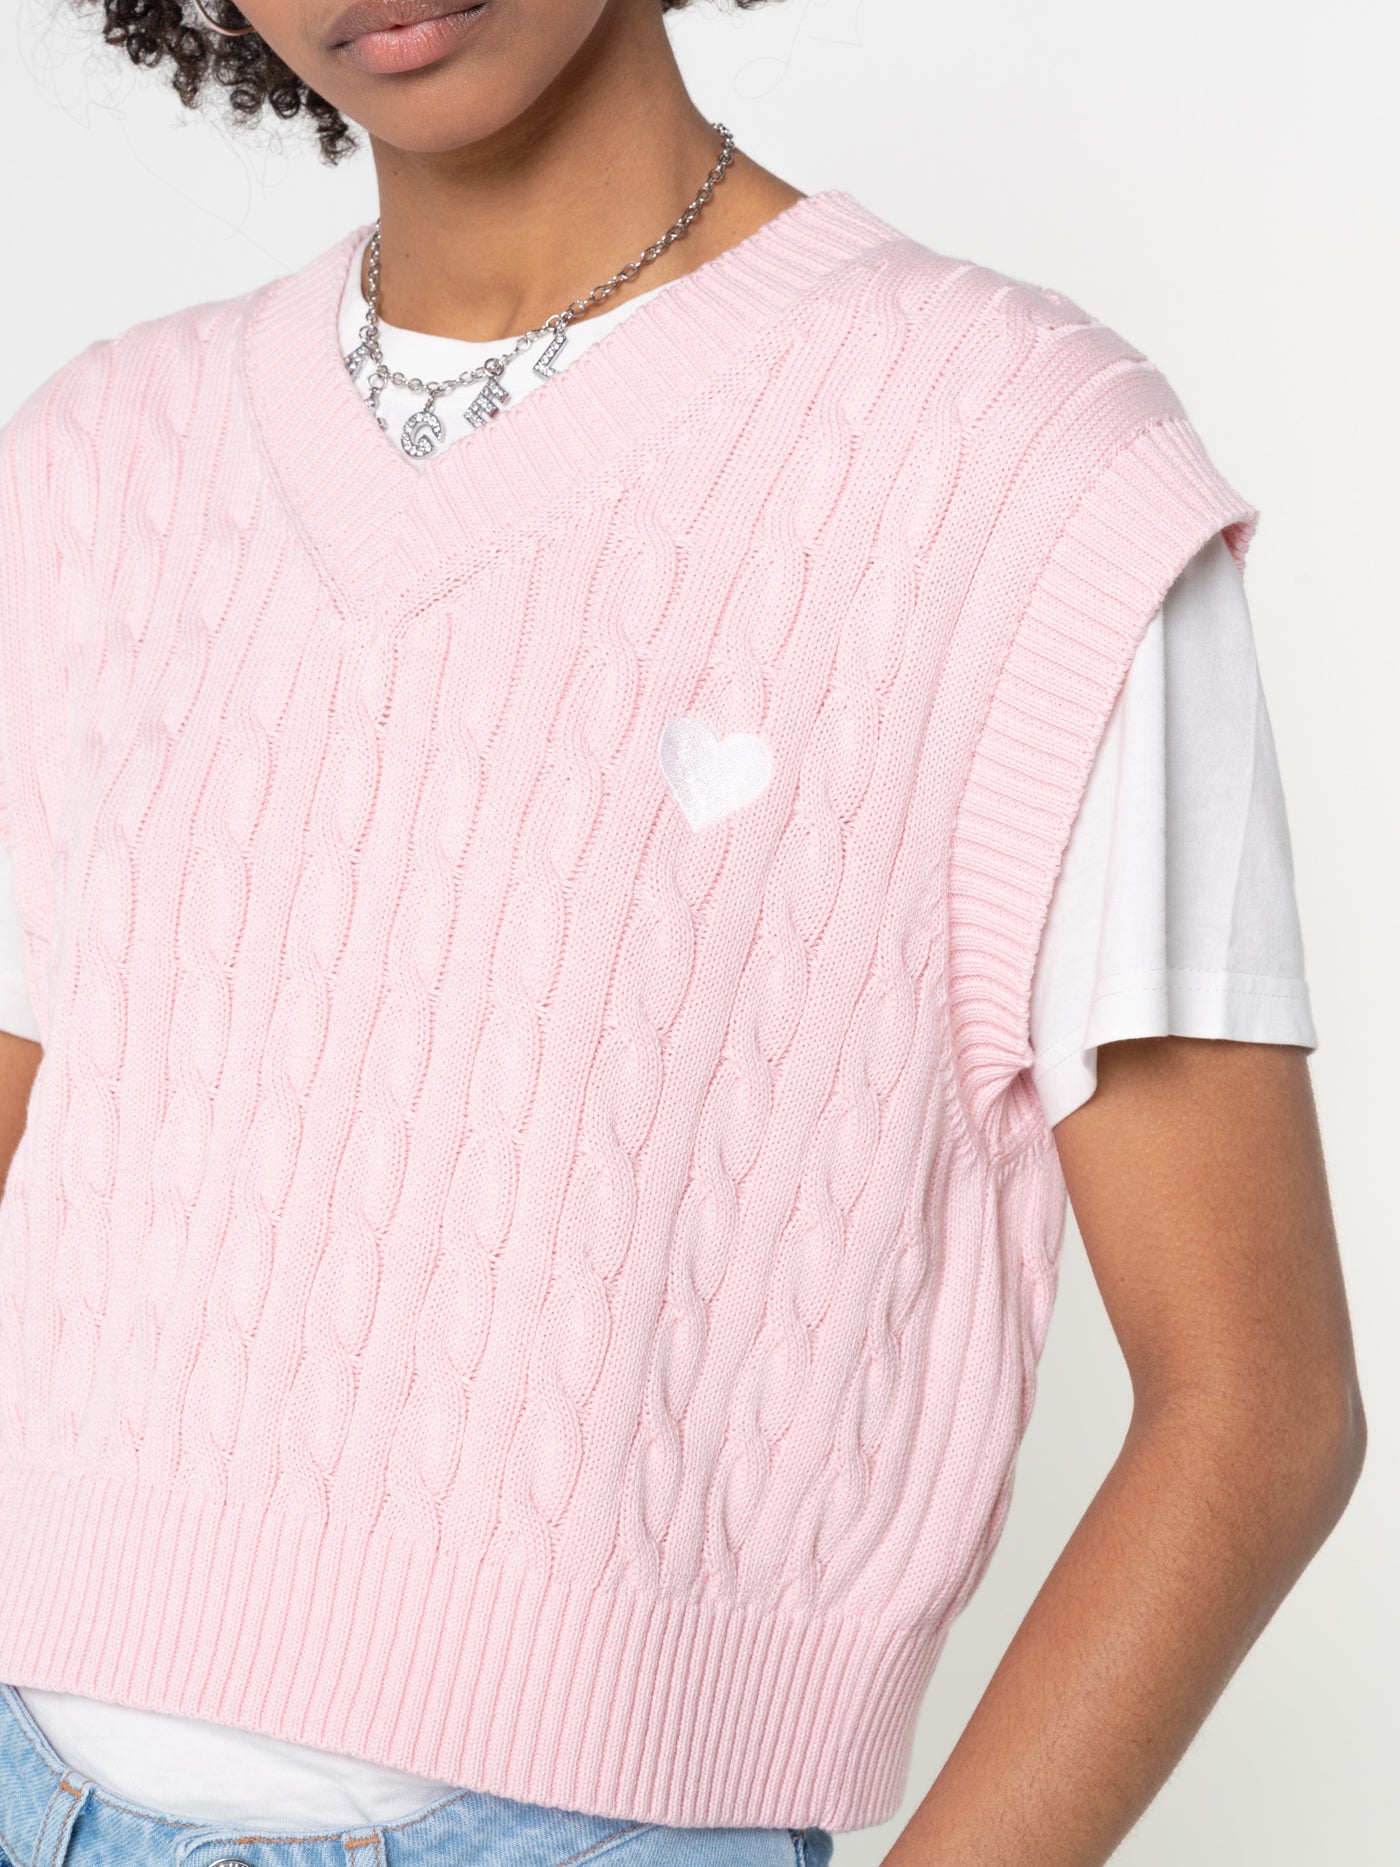 Cable knitted sweater vest in pink with heart embroidery detail